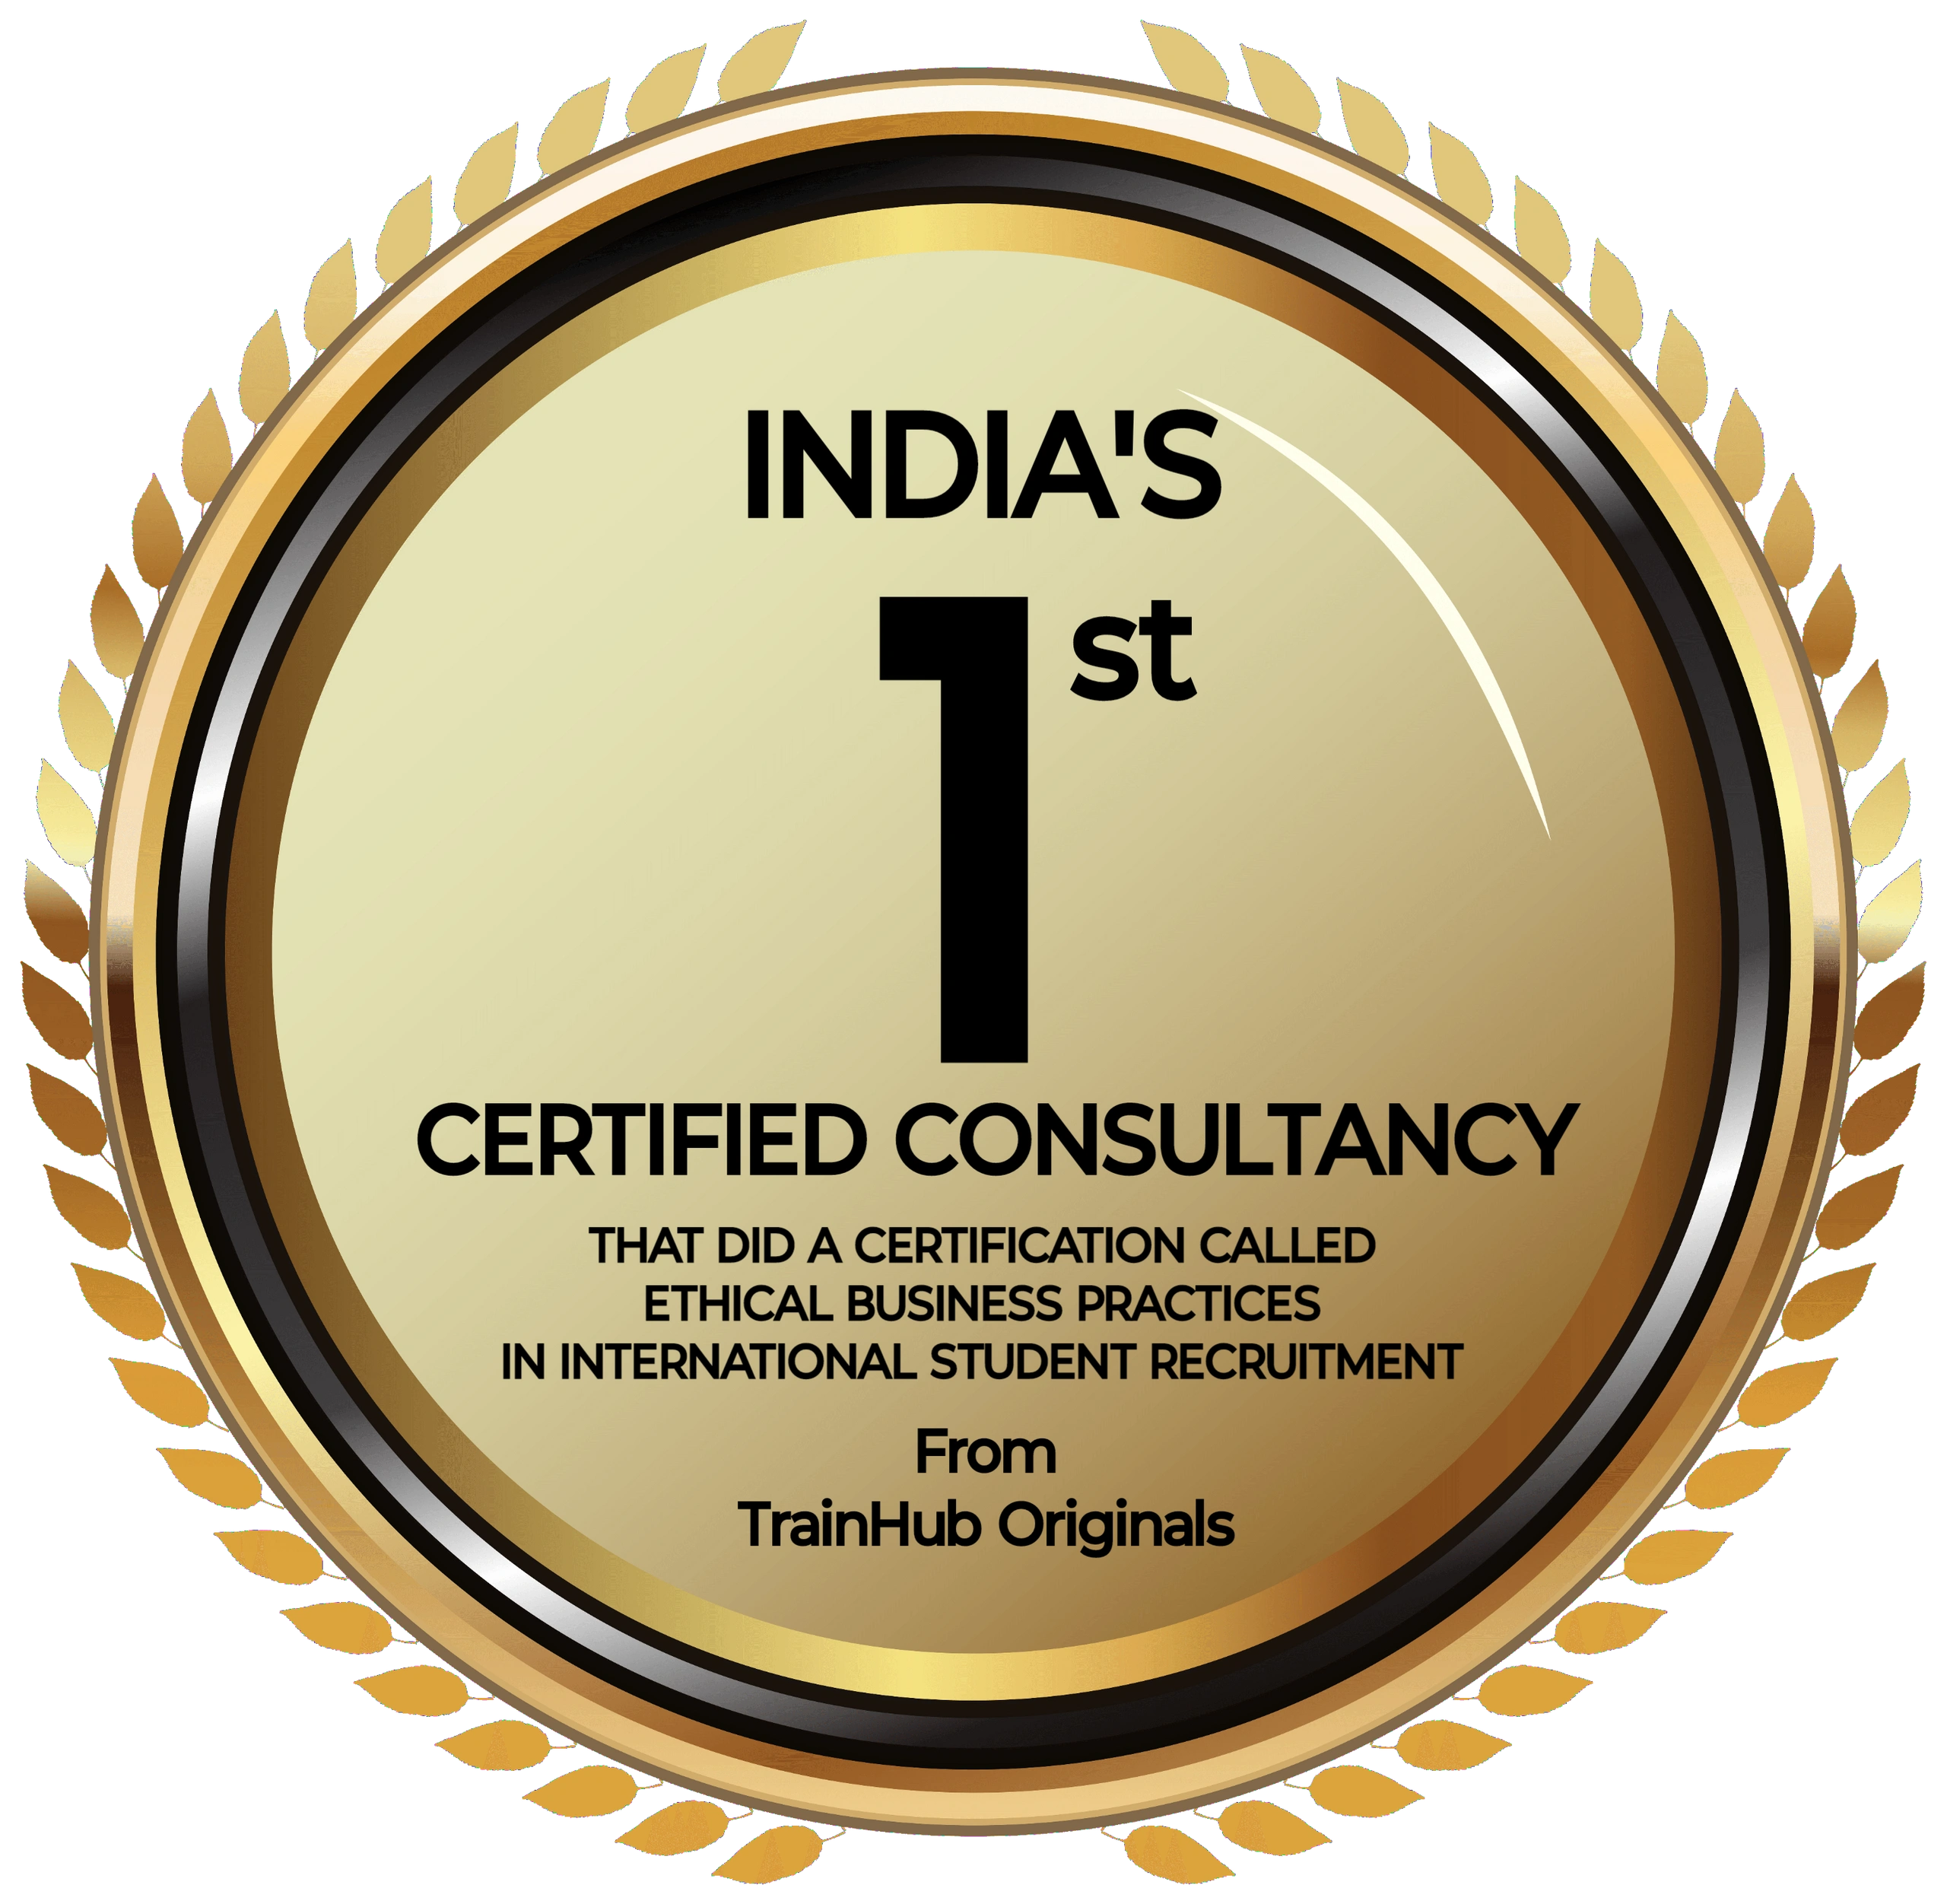 Galaxomas is India's first certified consultancy that follow Ethical Business Practices.